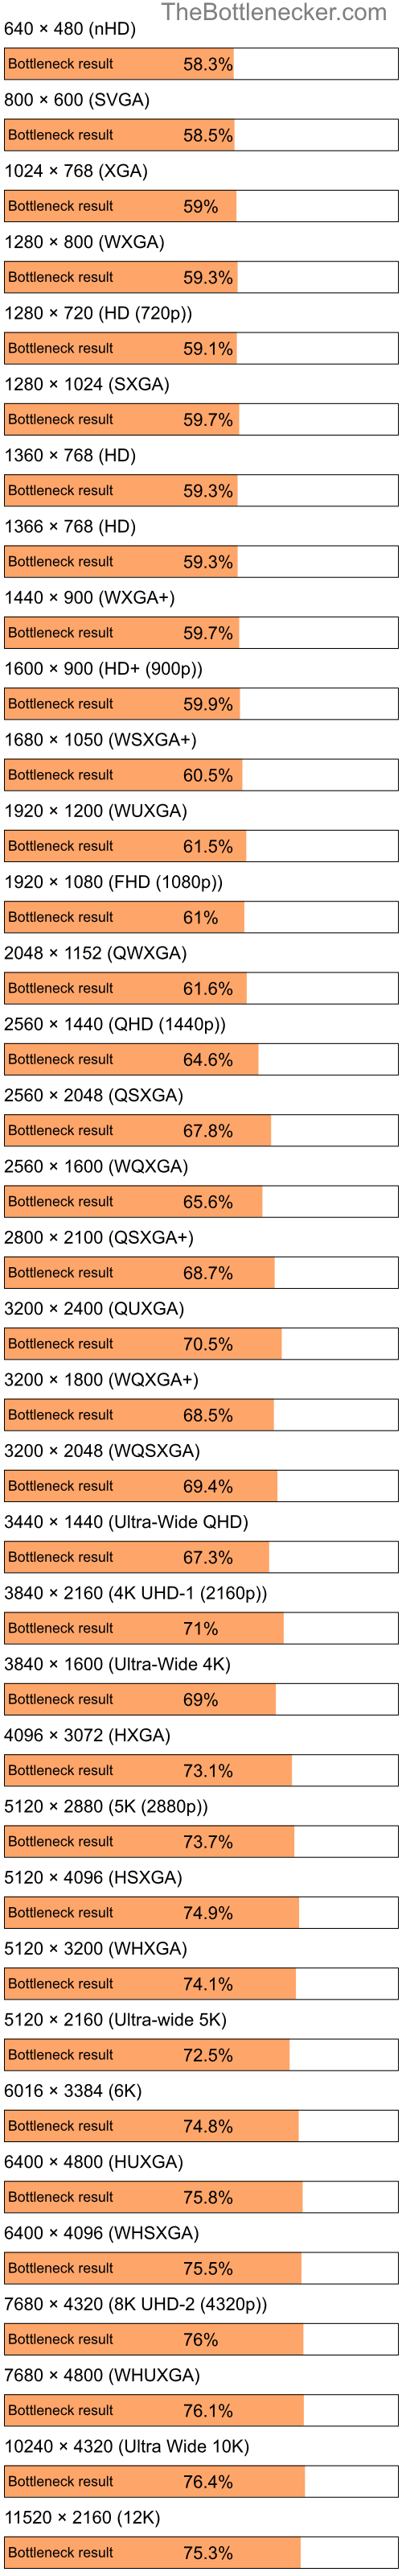 Bottleneck results by resolution for Intel Pentium 4 and NVIDIA GeForce 9100 in Processor Intense Tasks